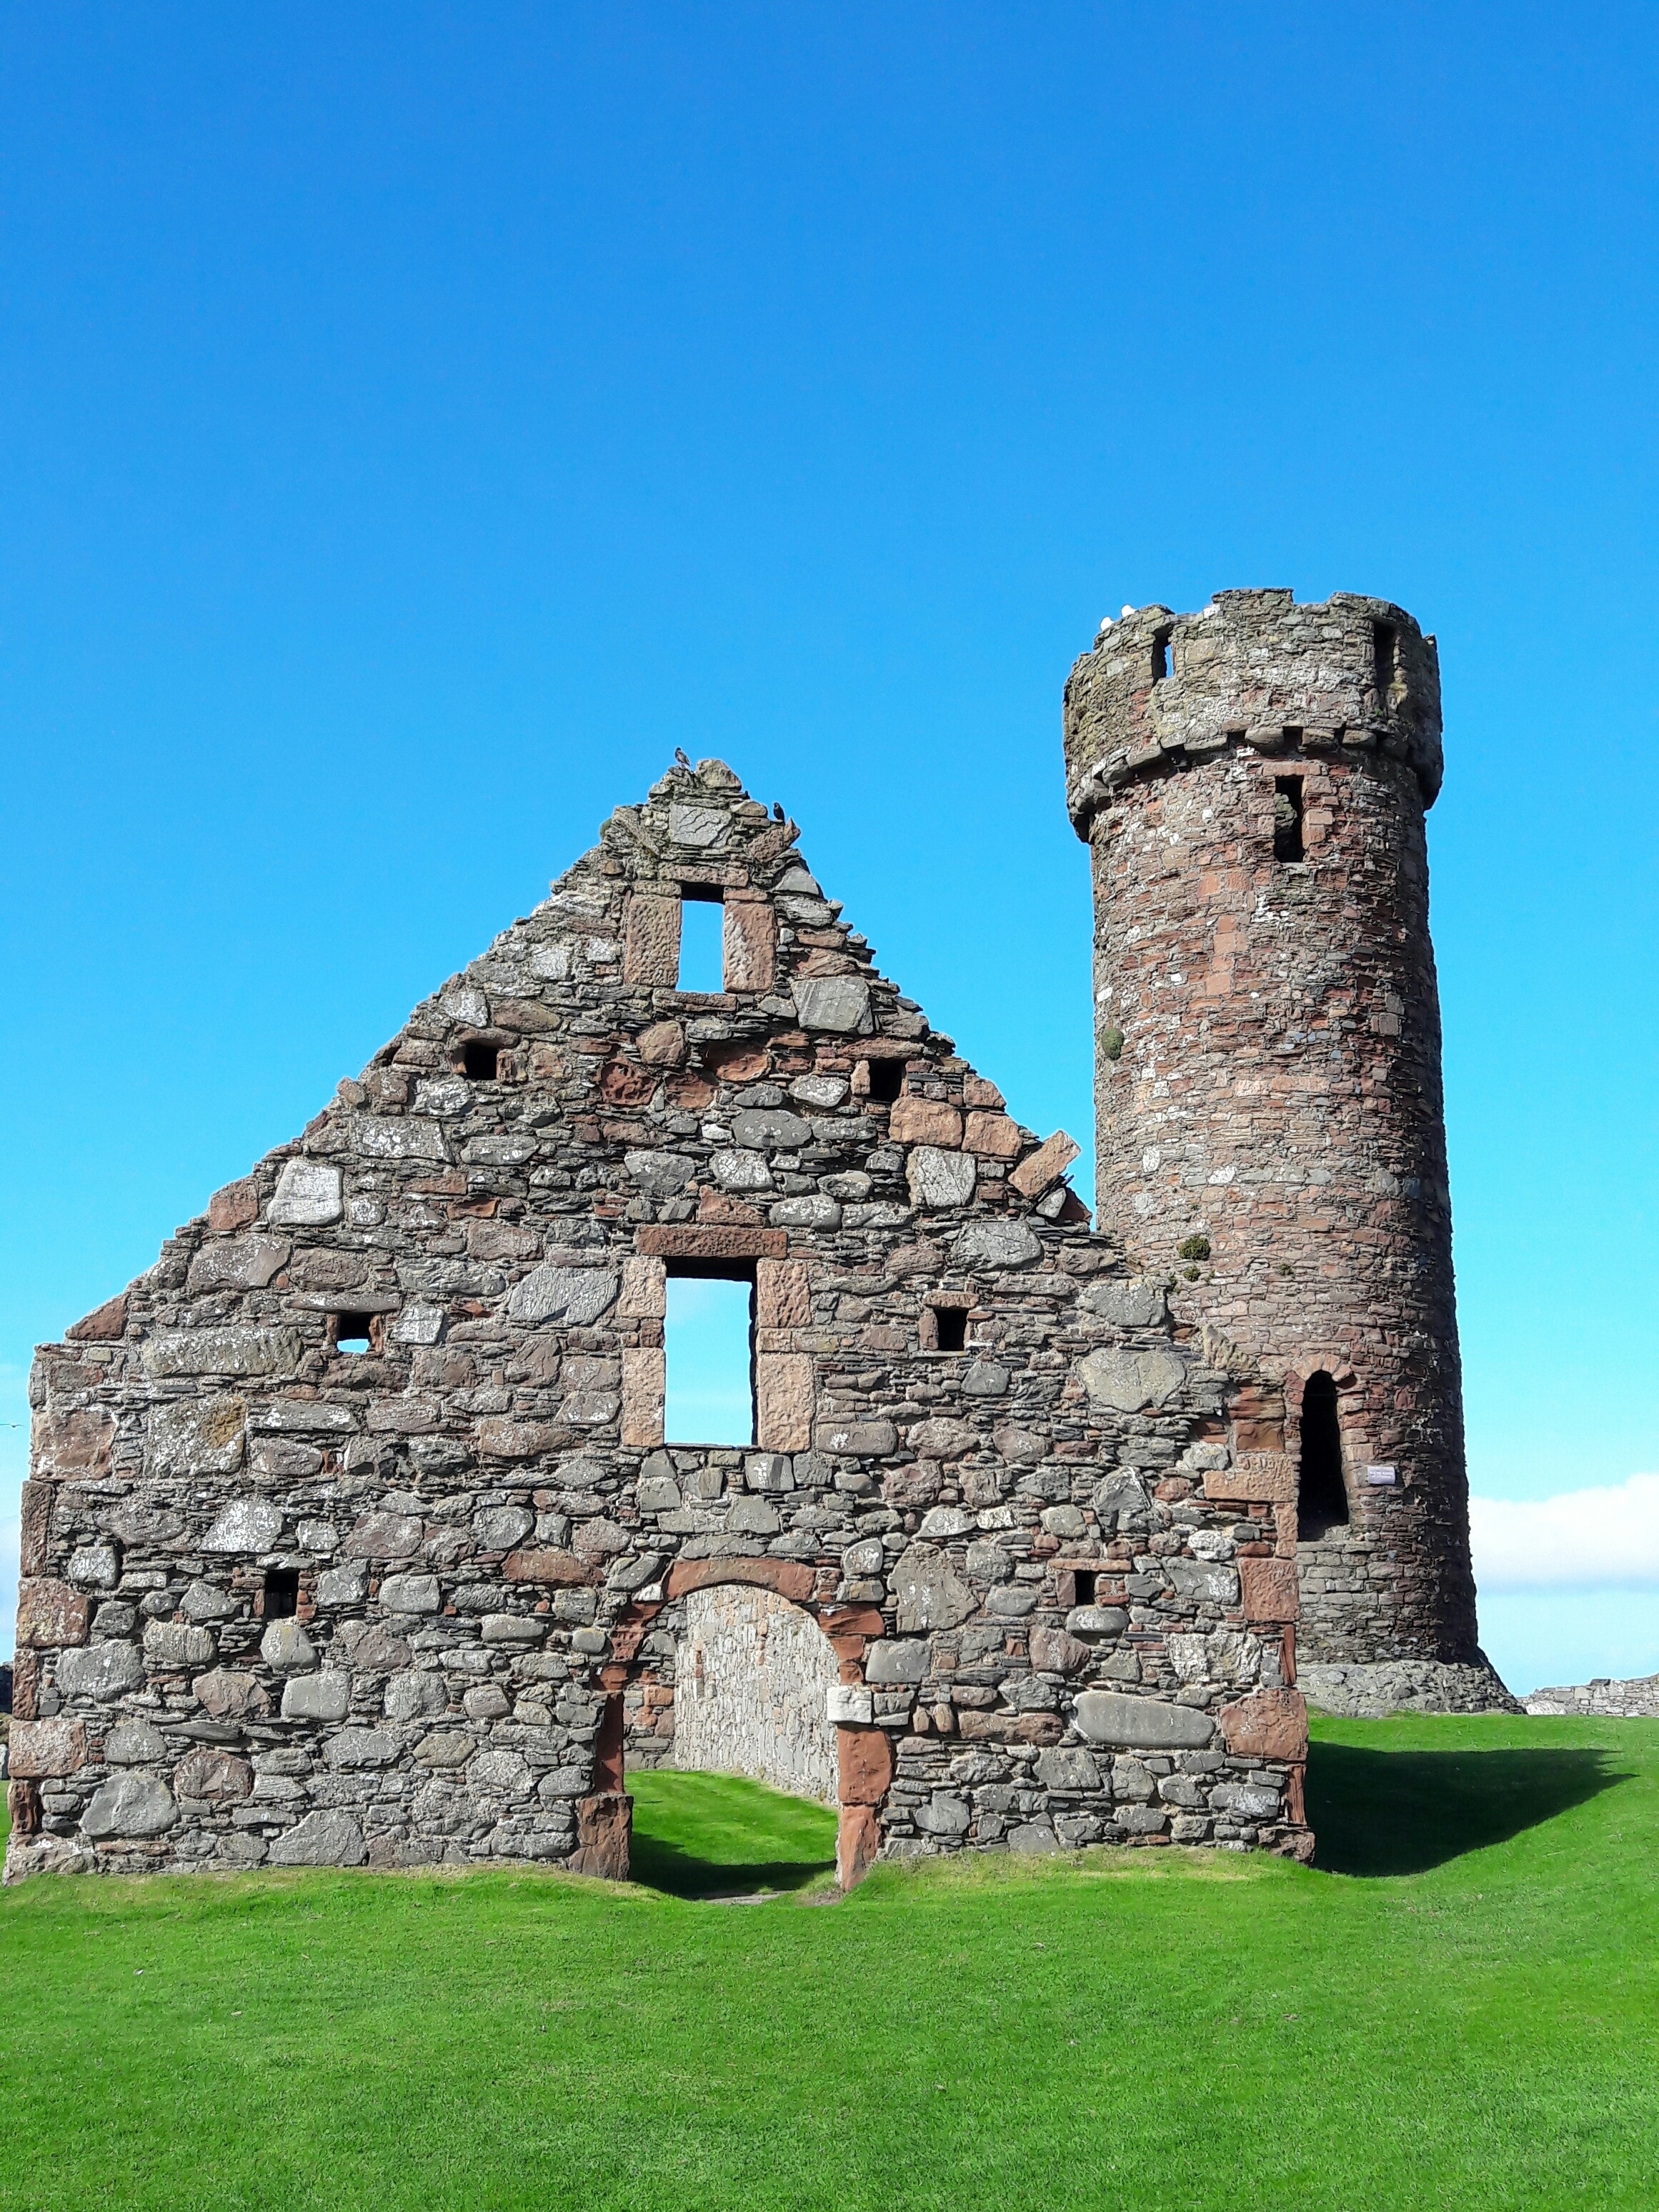 The late 14th century garrison hall and the 10th or 11th century round tower at Peel Castle